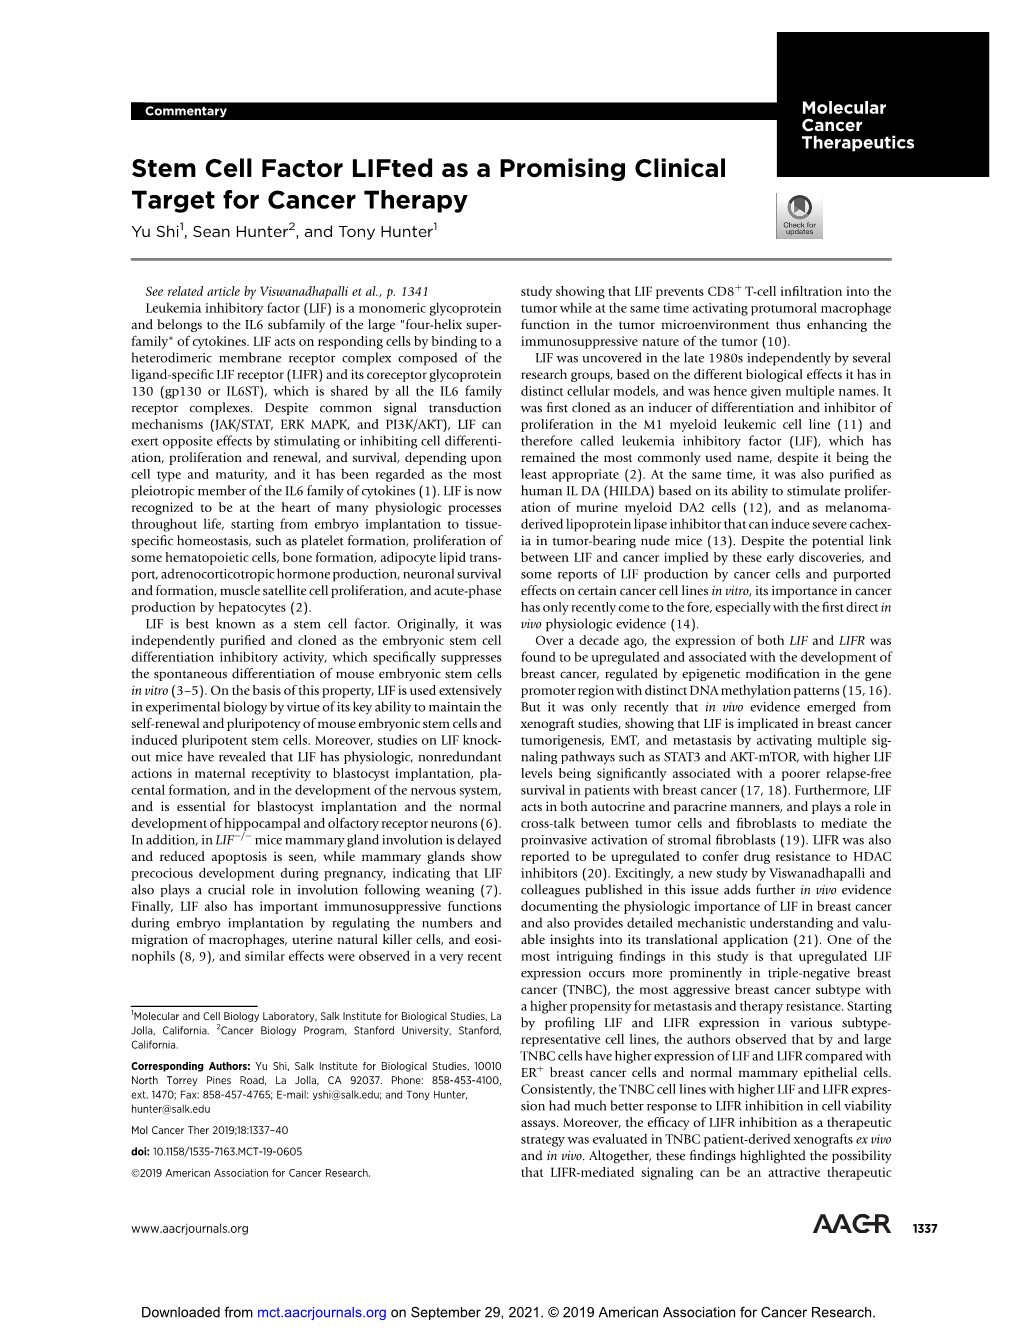 Stem Cell Factor Lifted As a Promising Clinical Target for Cancer Therapy Yu Shi1, Sean Hunter2, and Tony Hunter1